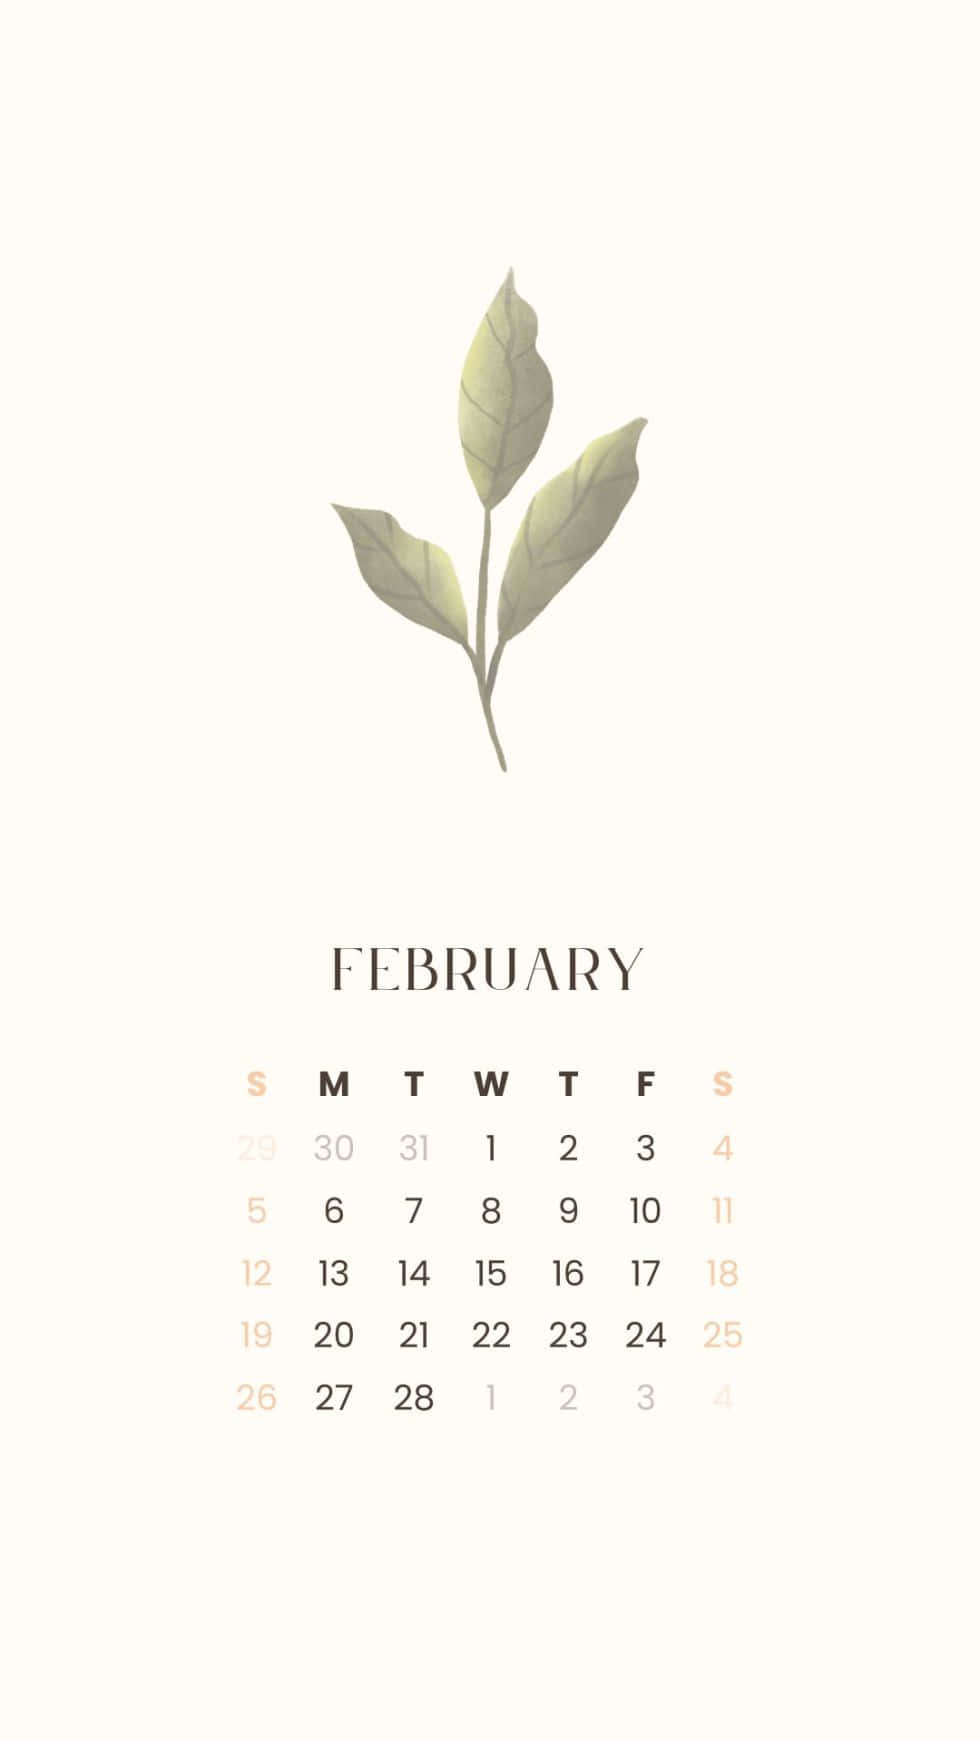 February 2019 Calendar With A Leaf On It